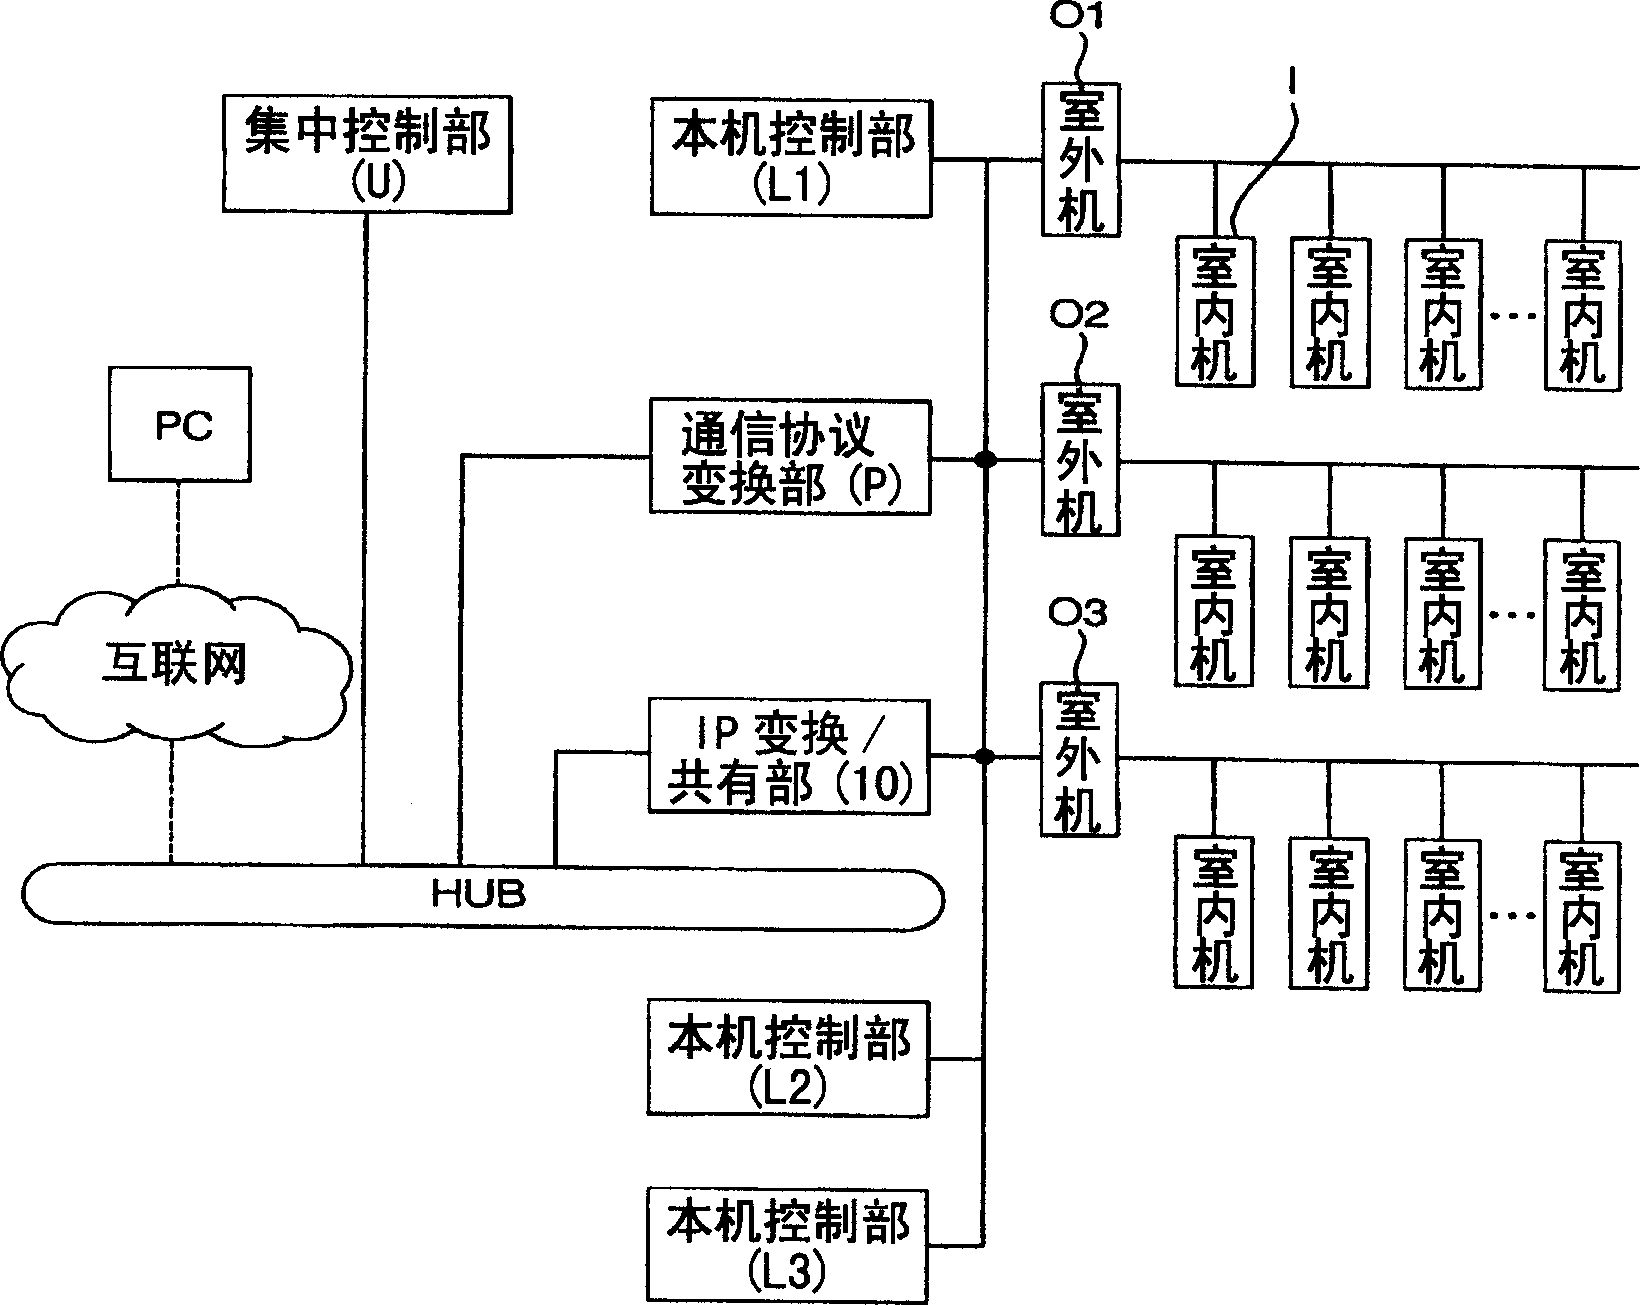 Central controlling multi-machine air conditioning system